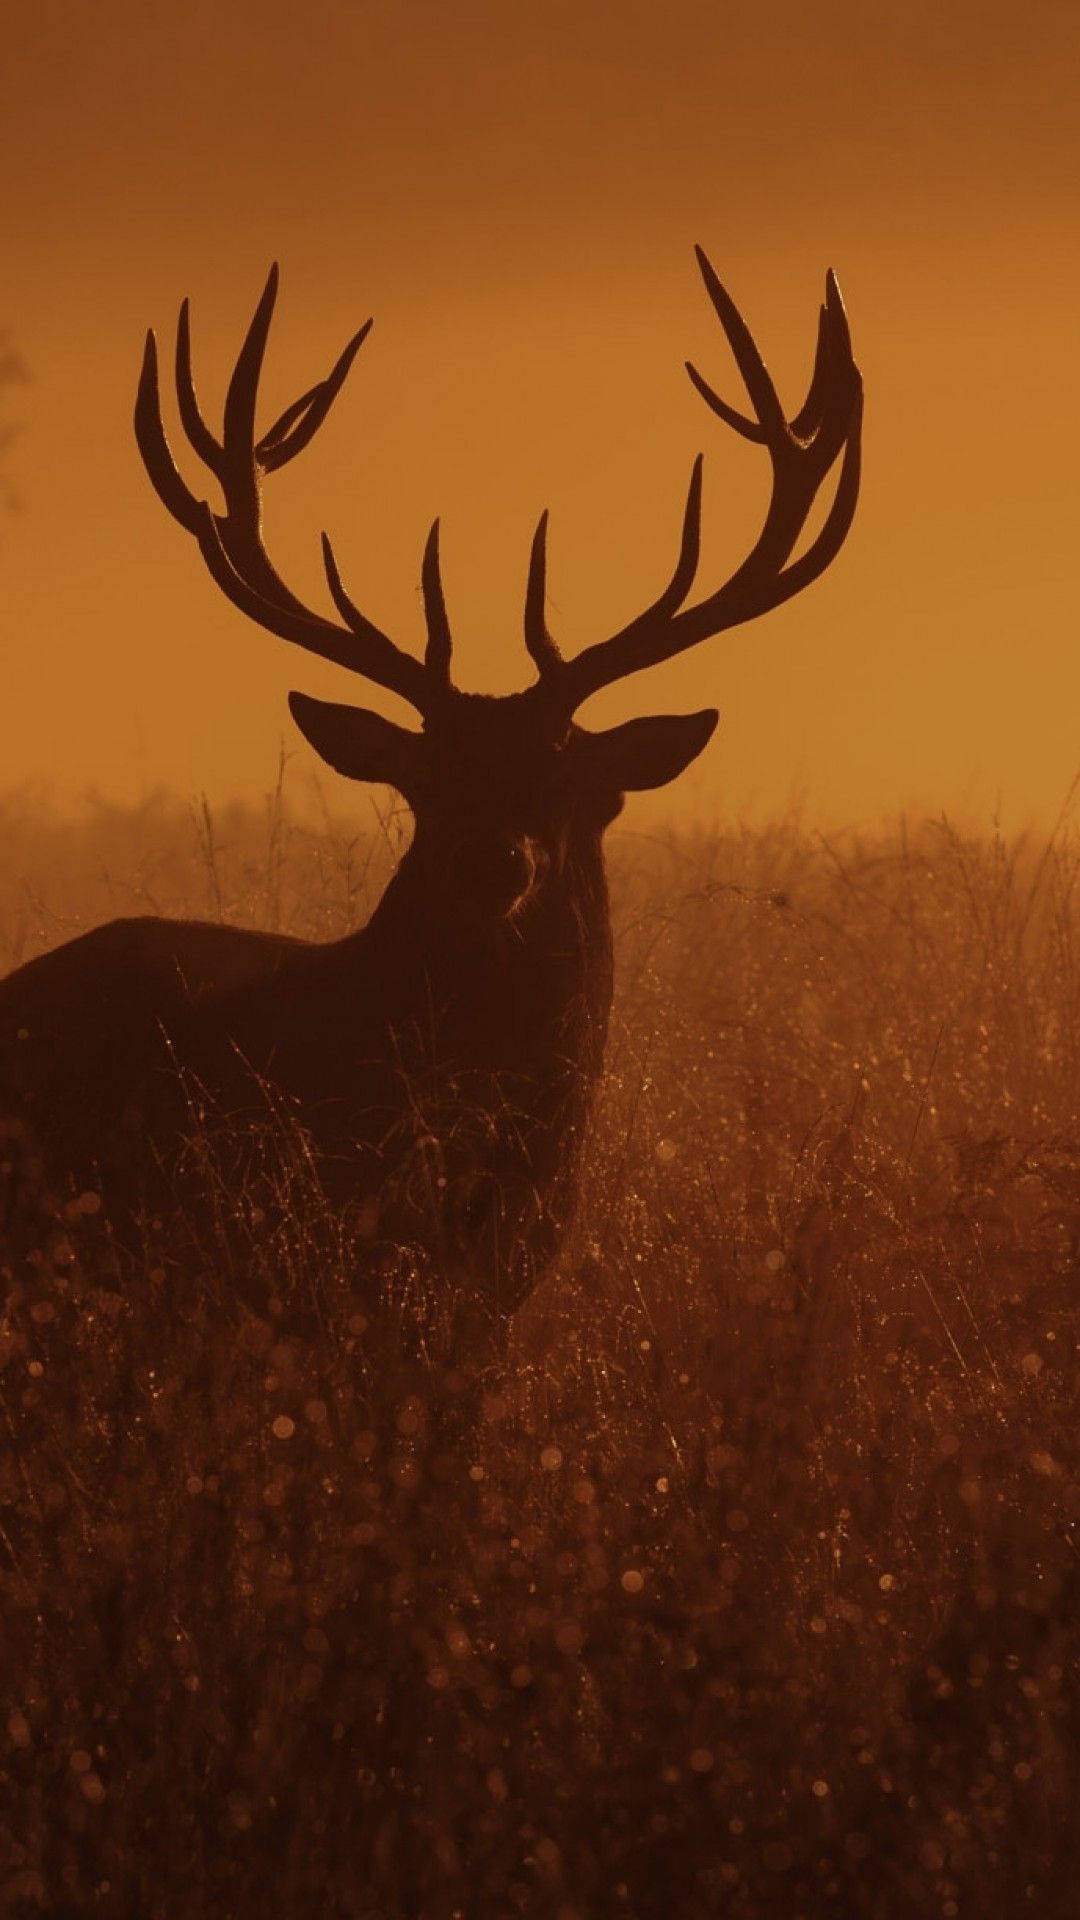 Check out this majestic Deer Iphone Wallpaper